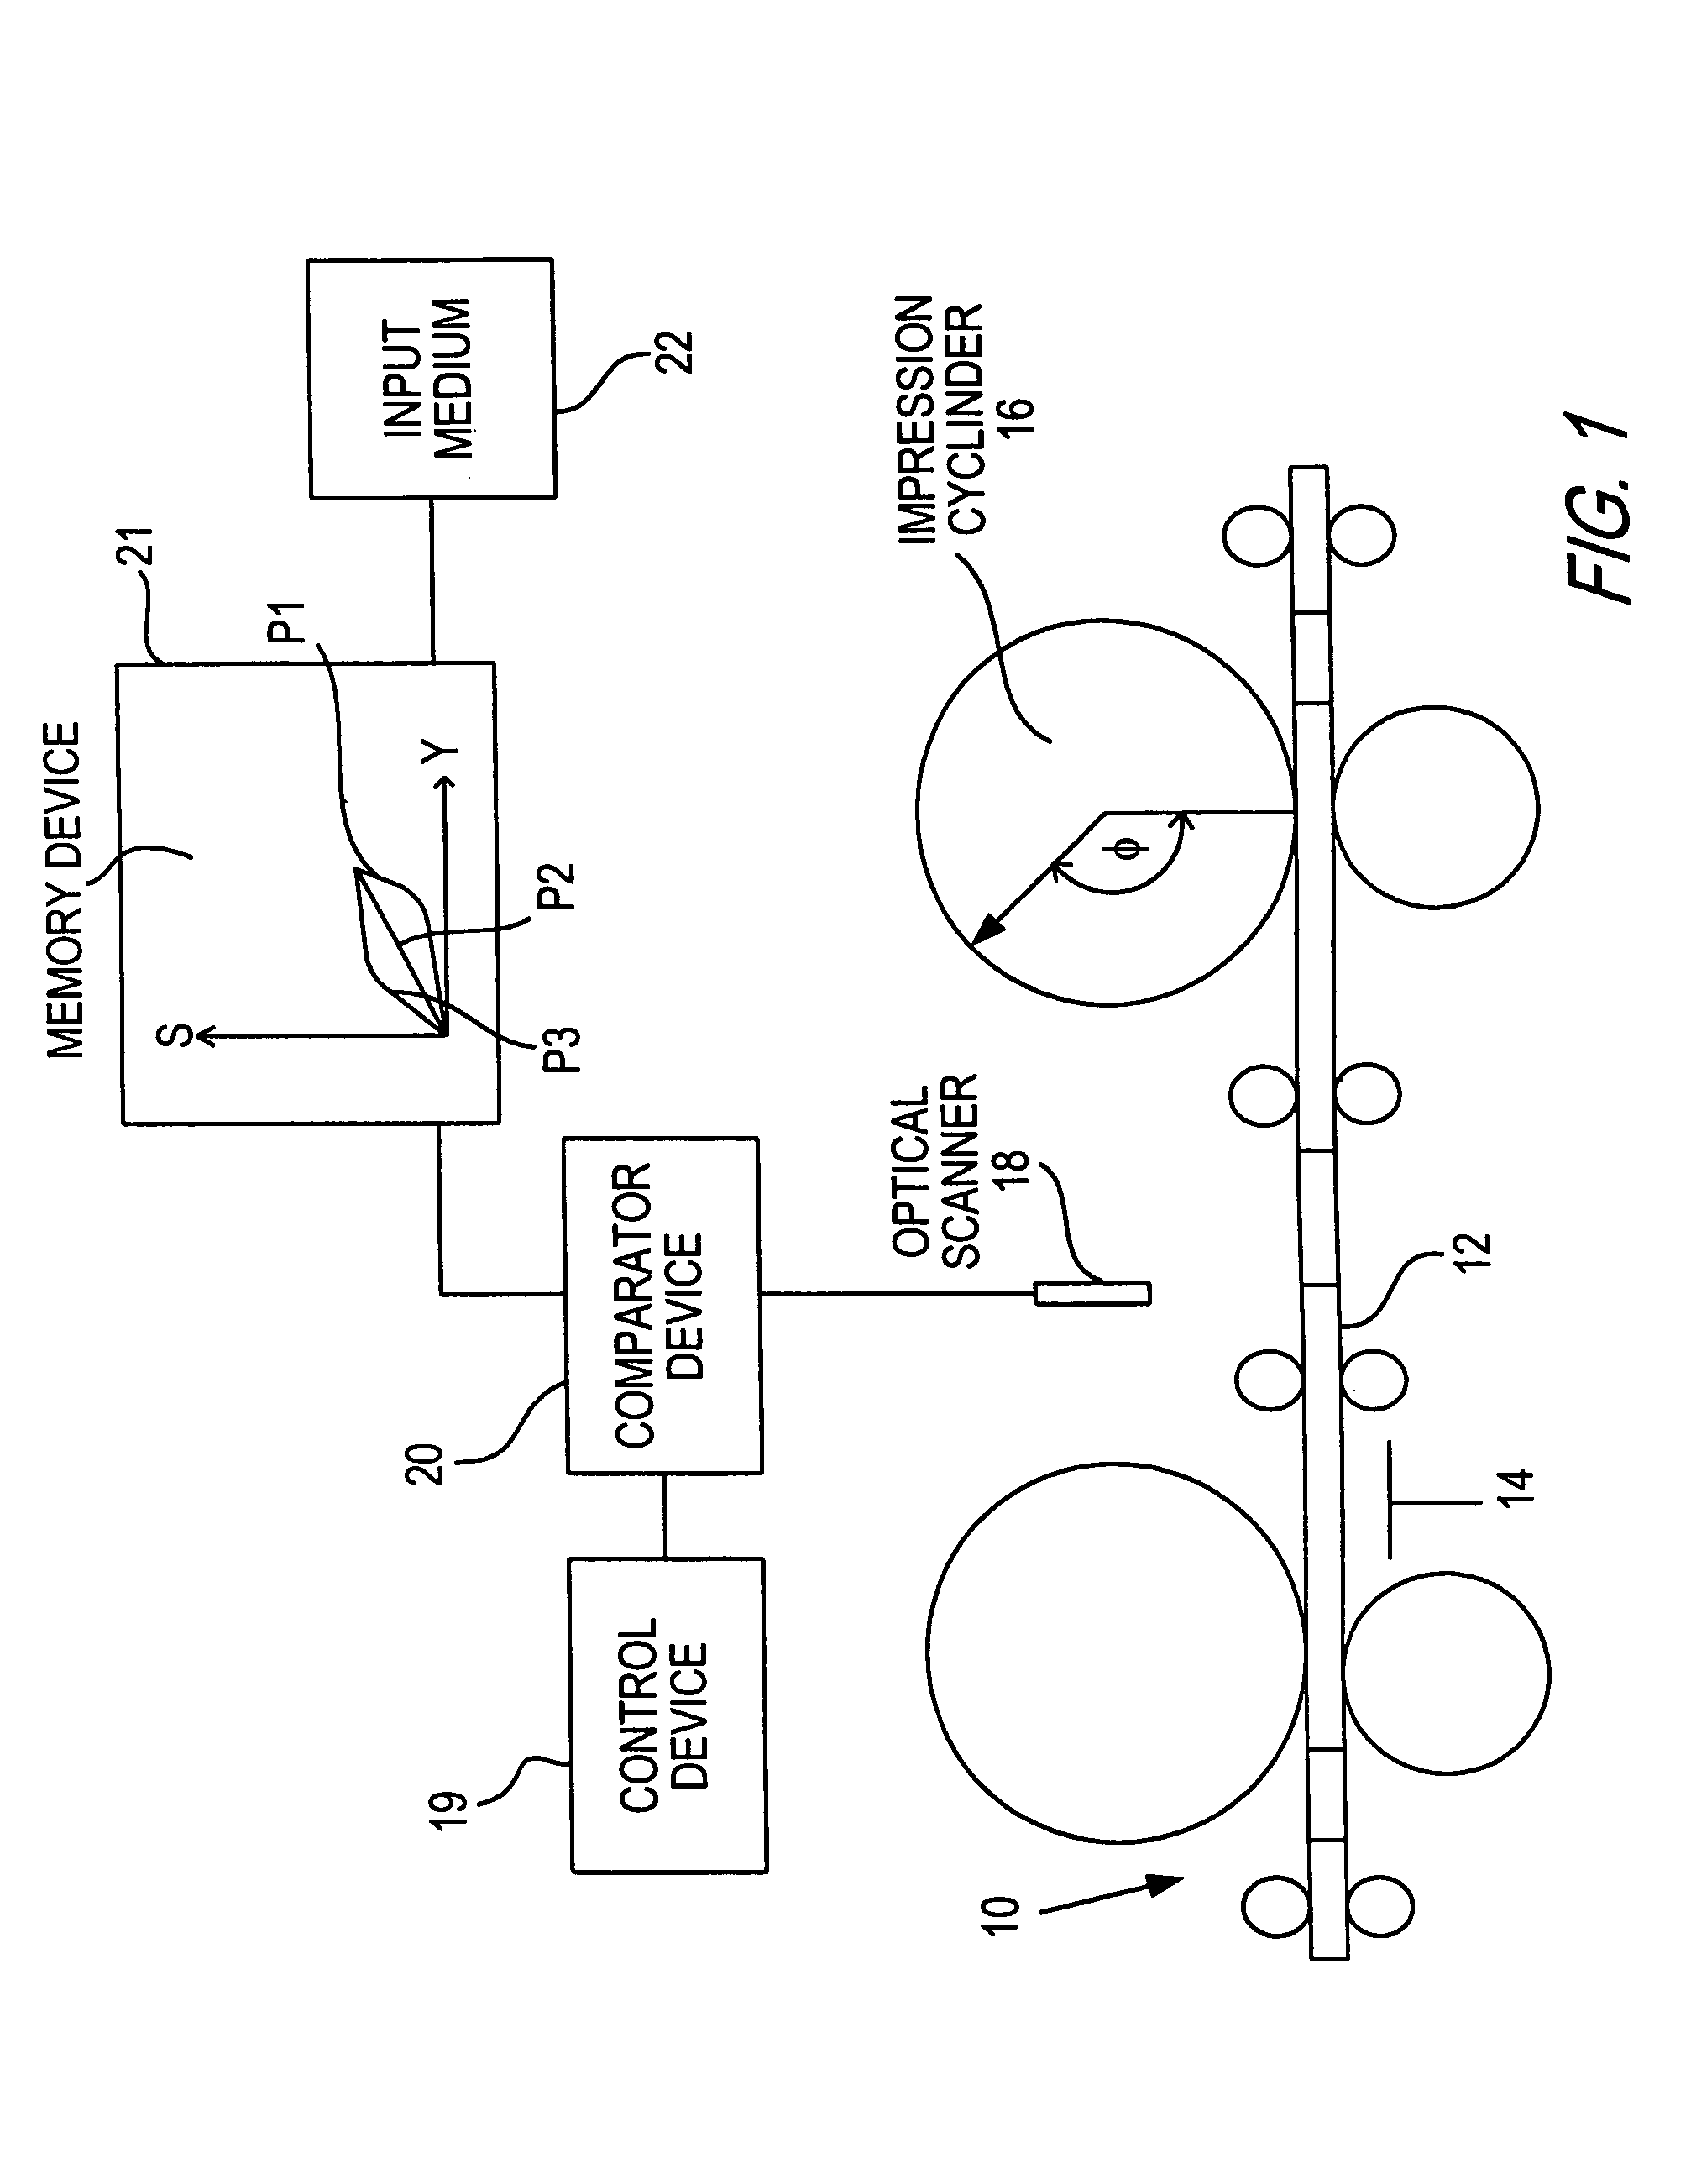 Method and device for correcting the positional deviation of a conveyed item by adjusting the cylinder's angle rotation relative to the conveyed item